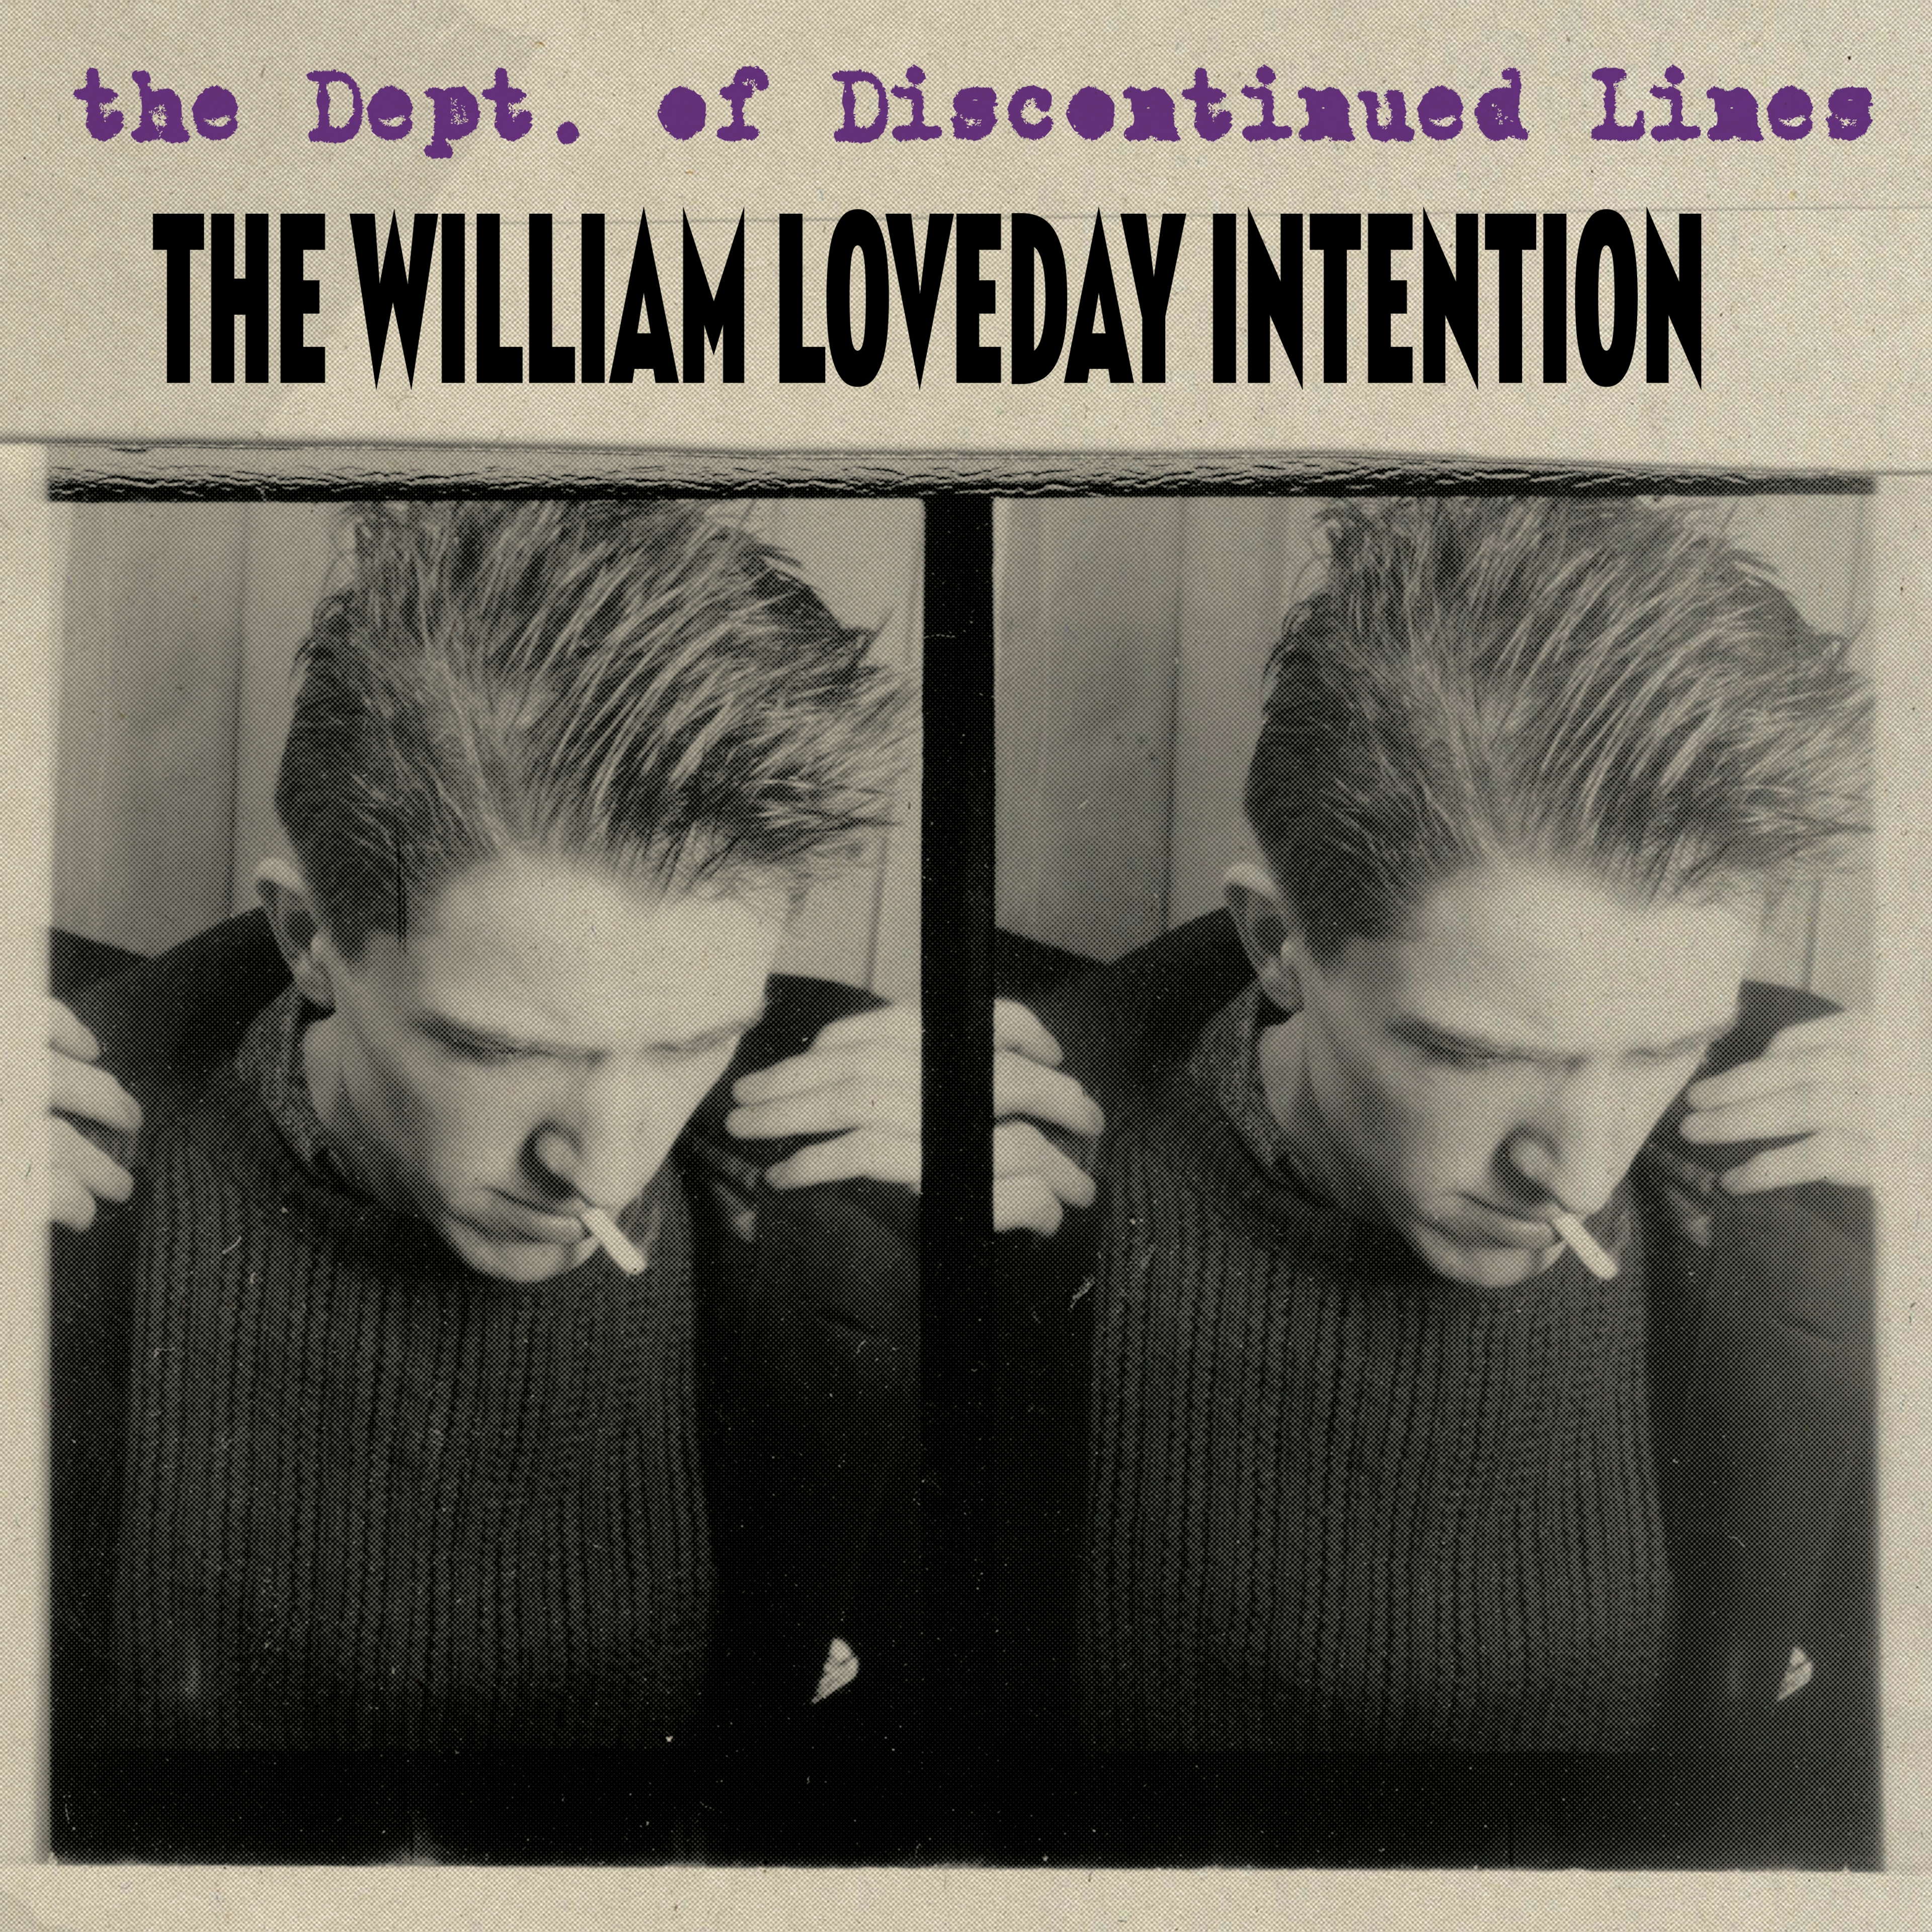 Album artwork for Album artwork for The Dept. of Discontinued Lines by The William Loveday Intention by The Dept. of Discontinued Lines - The William Loveday Intention